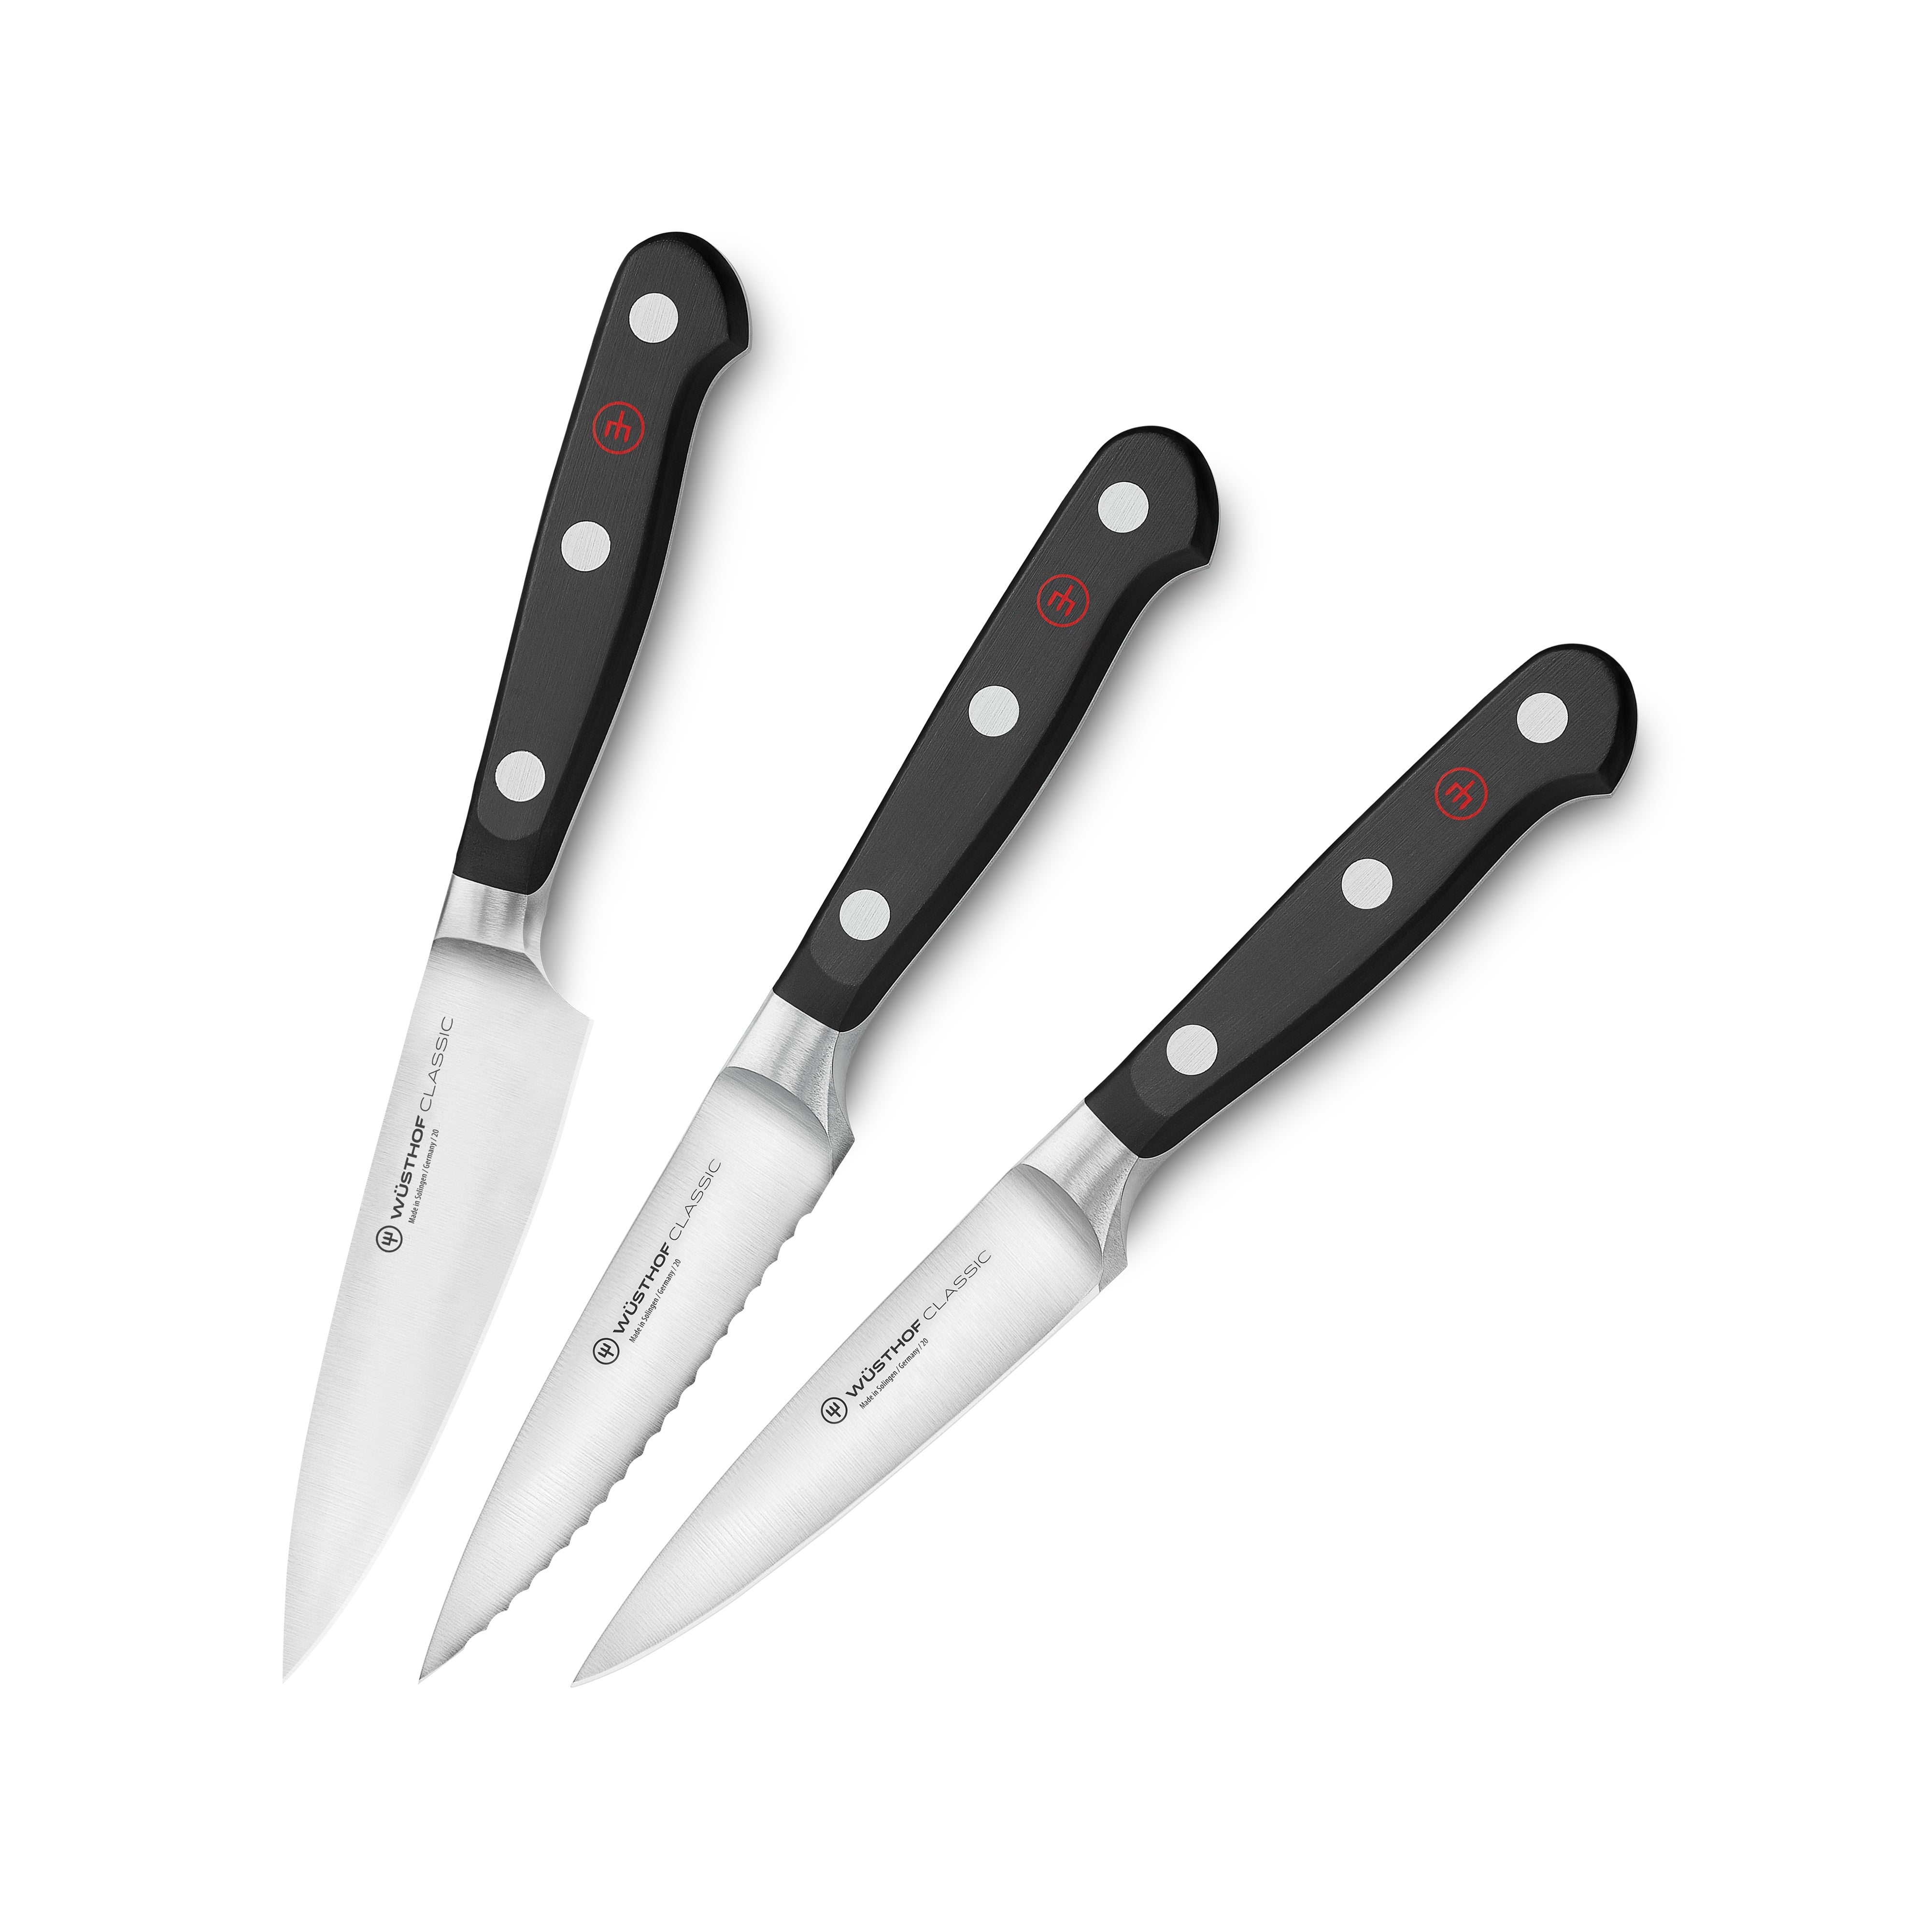 Wusthof Classic Paring Knife Set - 3 Piece – Cutlery and More